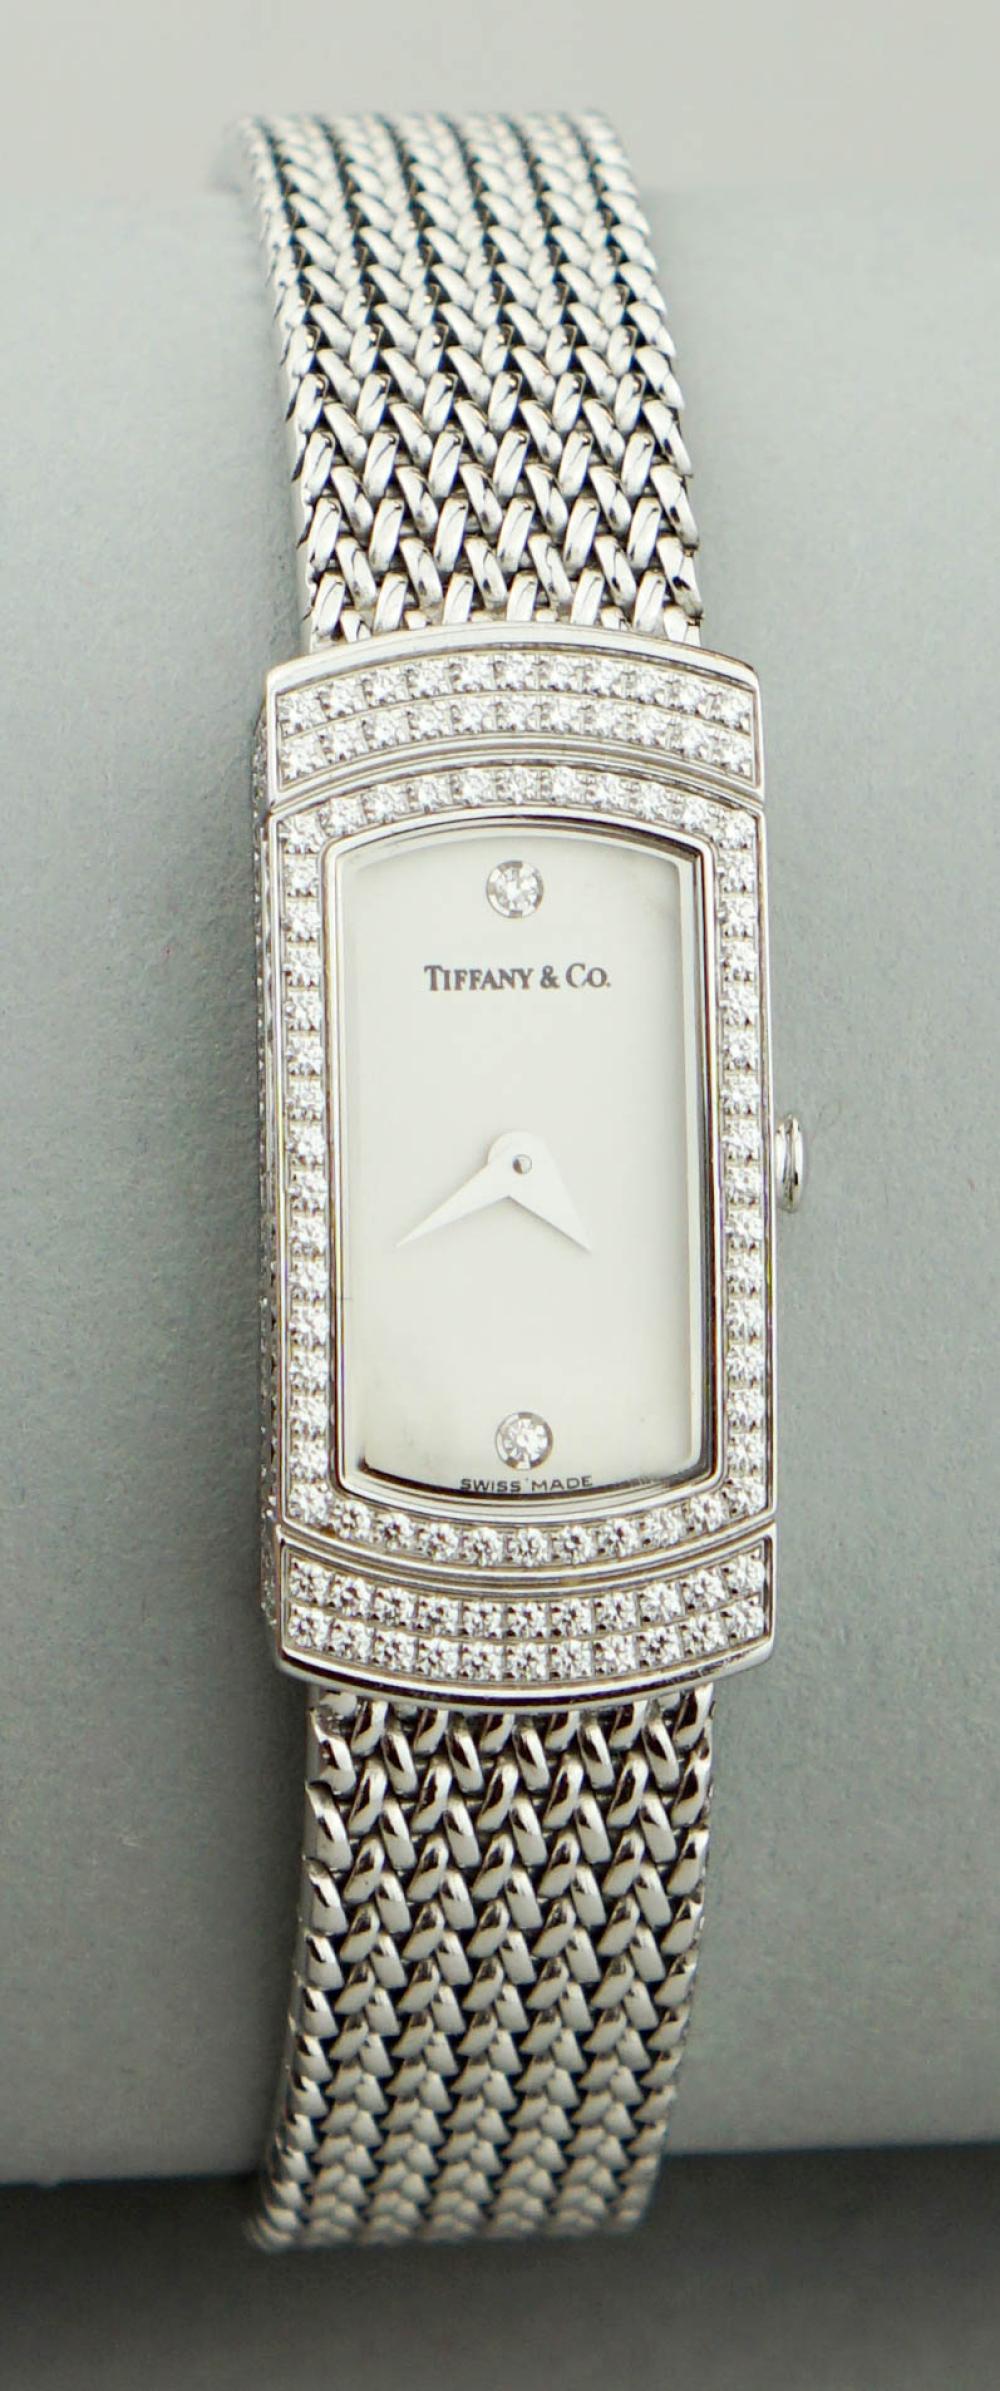 TIFFANY & CO. 18K WHITE GOLD AND